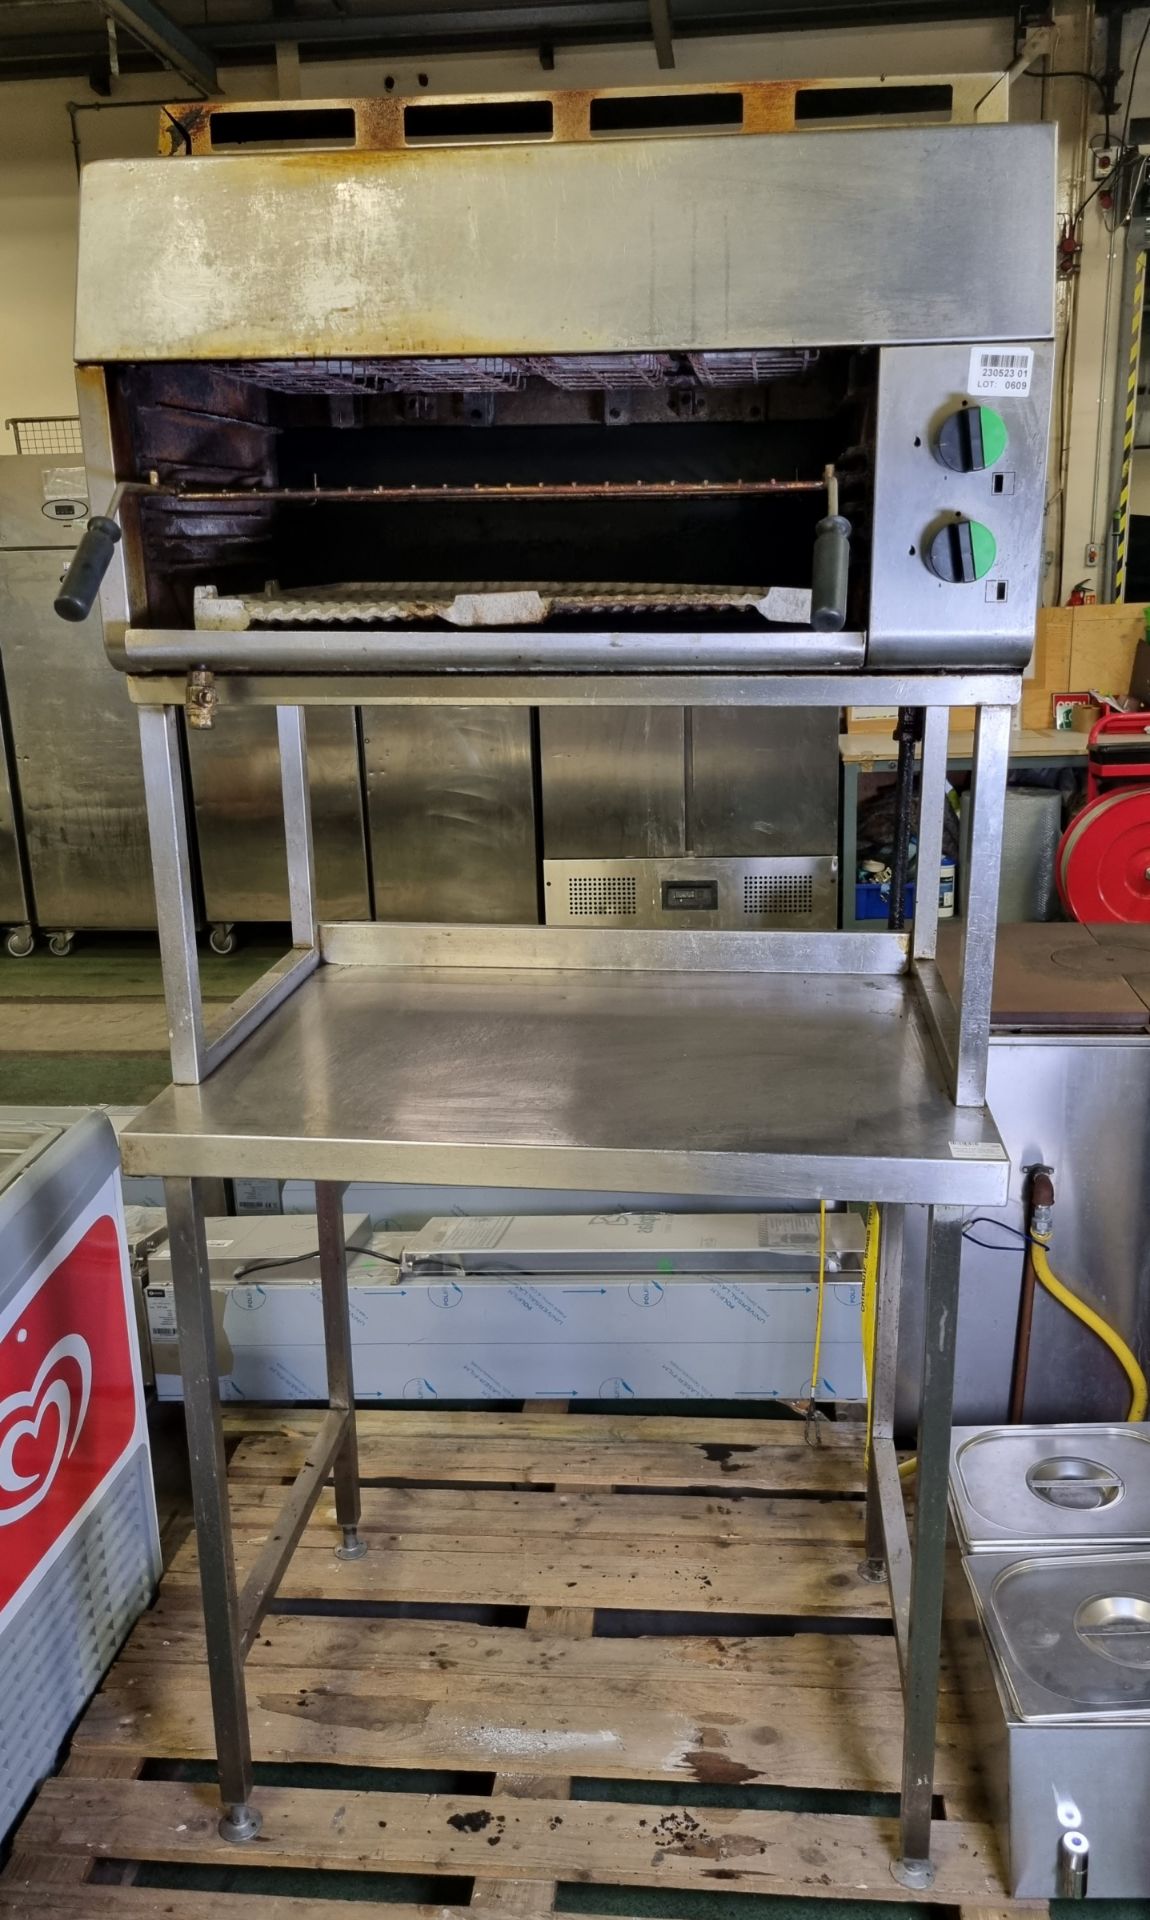 Stainless steel work table with gas grill on upper shelf - dimensions: 90 x 70 x 190cm